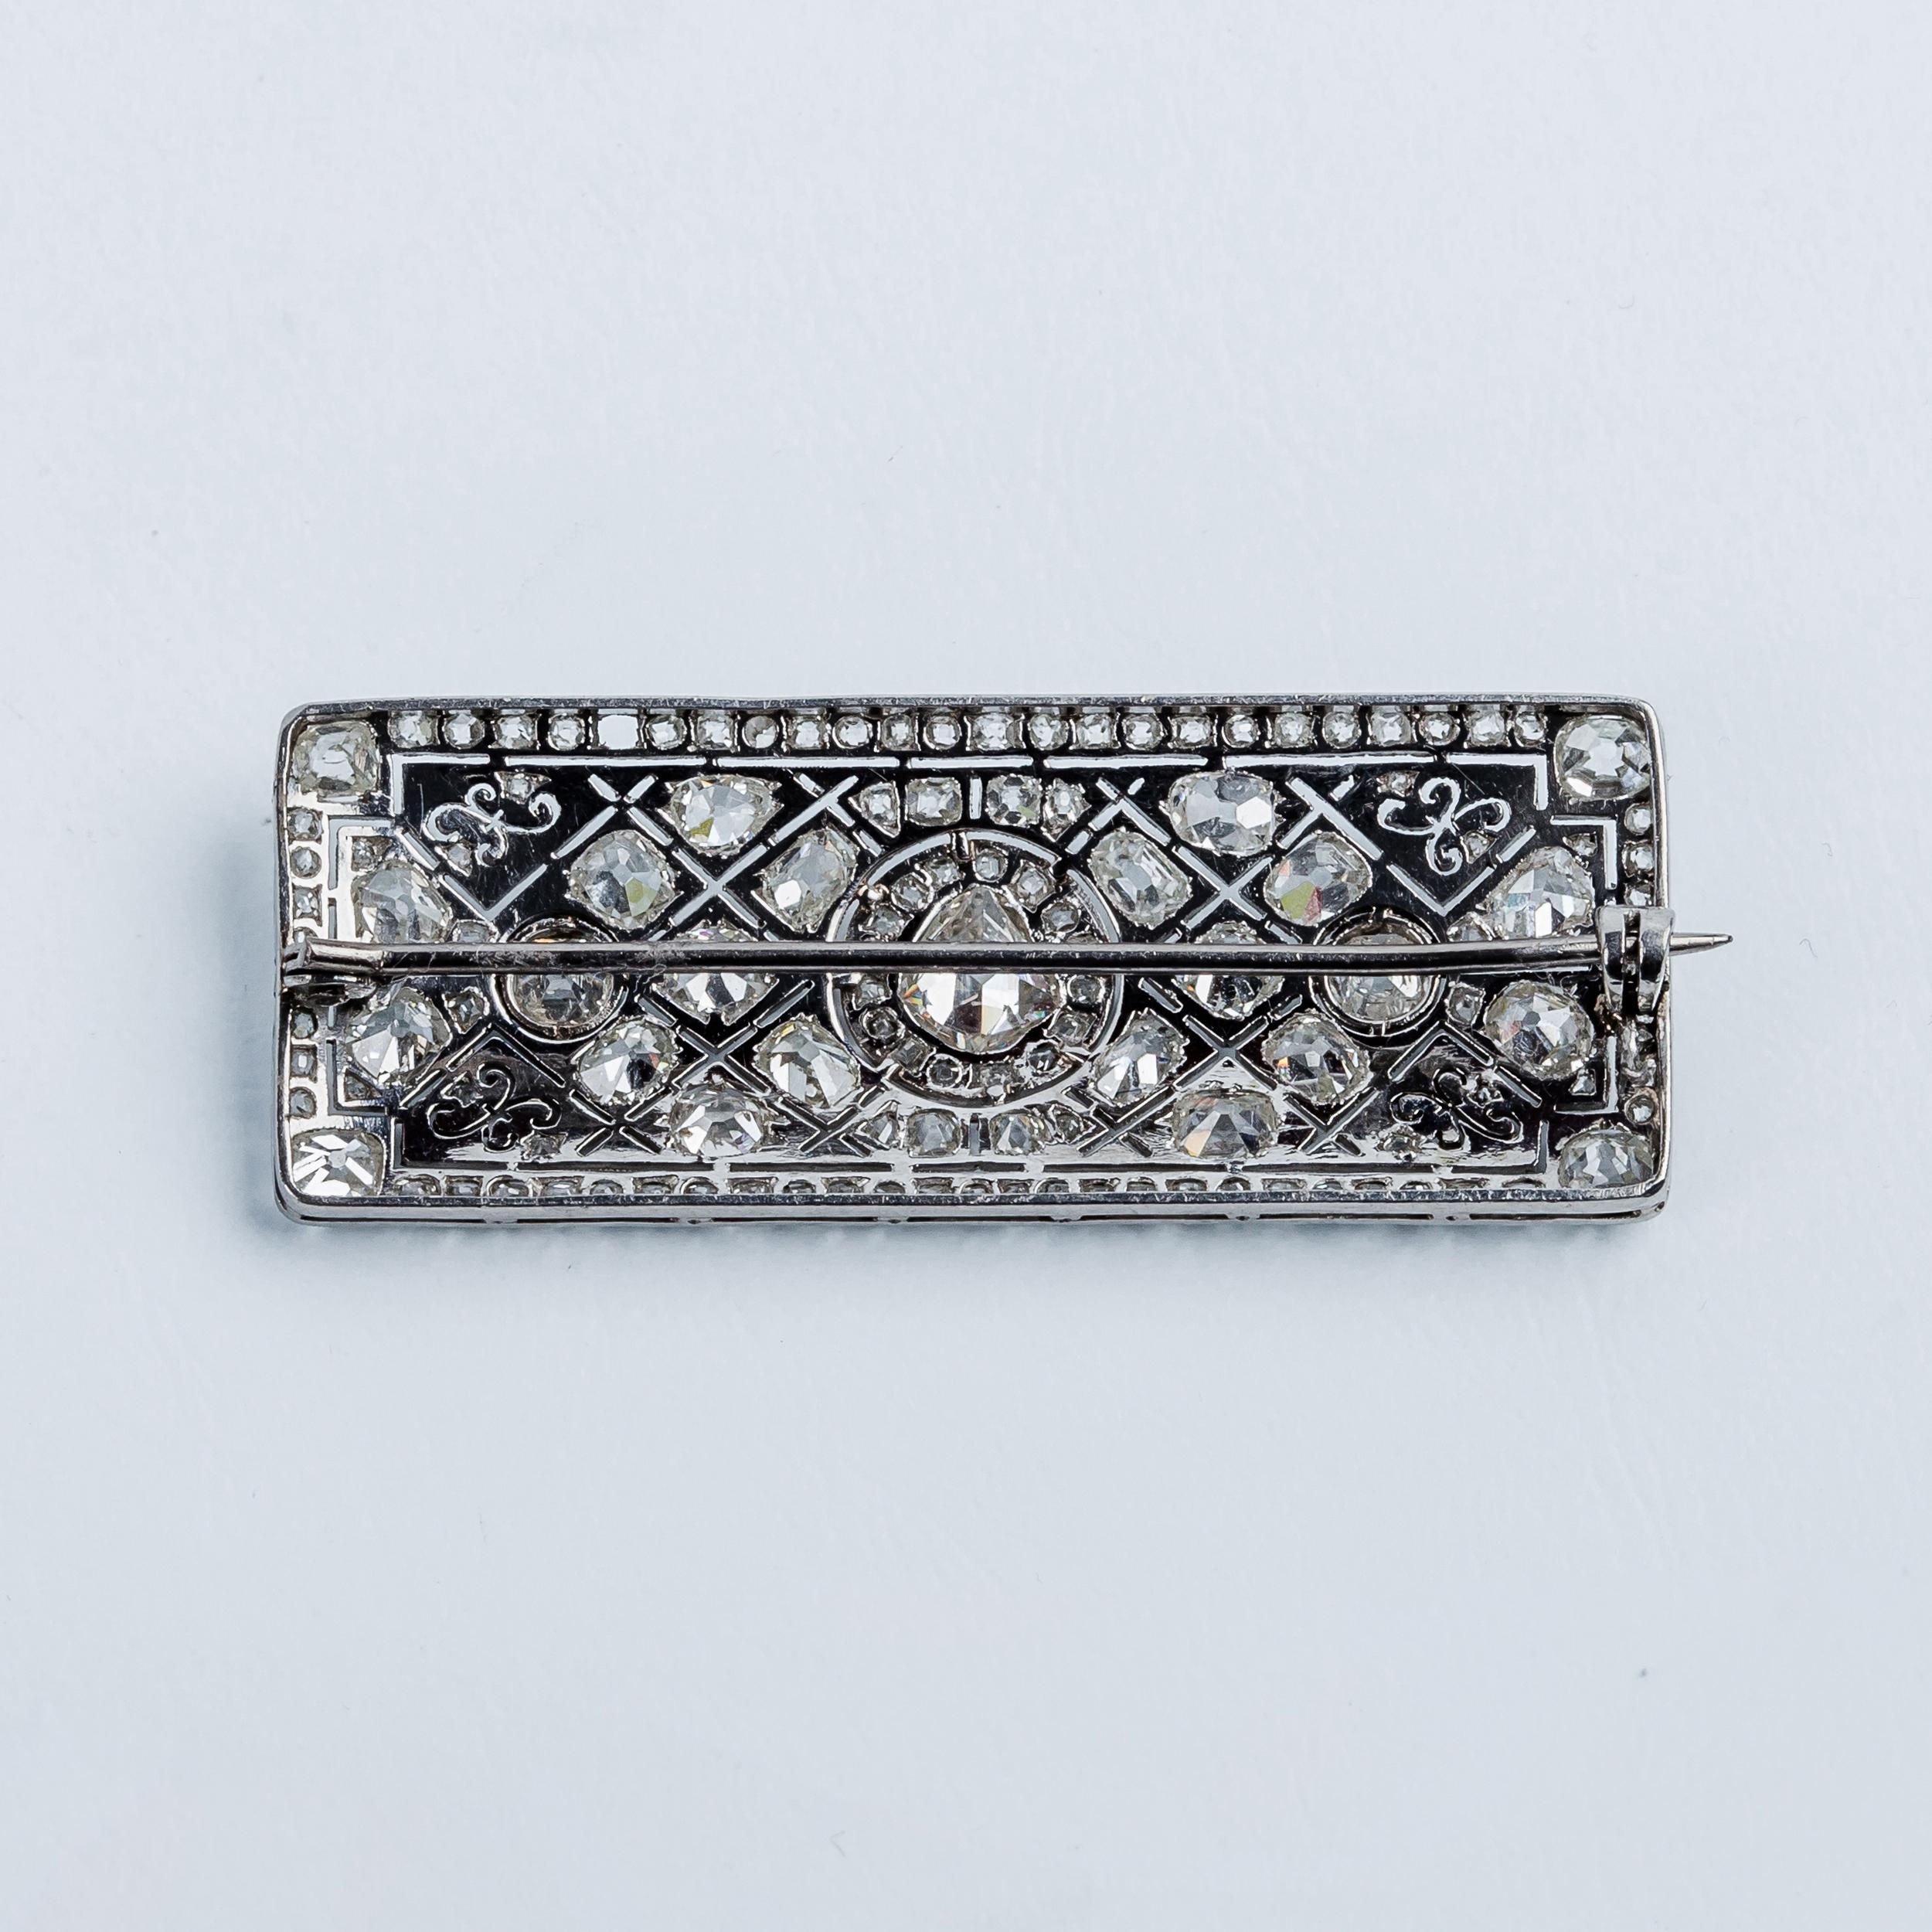 This beautiful Art Deco Brooch in rectangular shape and platinum openwork is full of brilliant-cut and cushion-cut white diamonds, with a central white diamond in oval shape and knurled ornaments.

READY TO SHIP
*Shipment of this piece is not